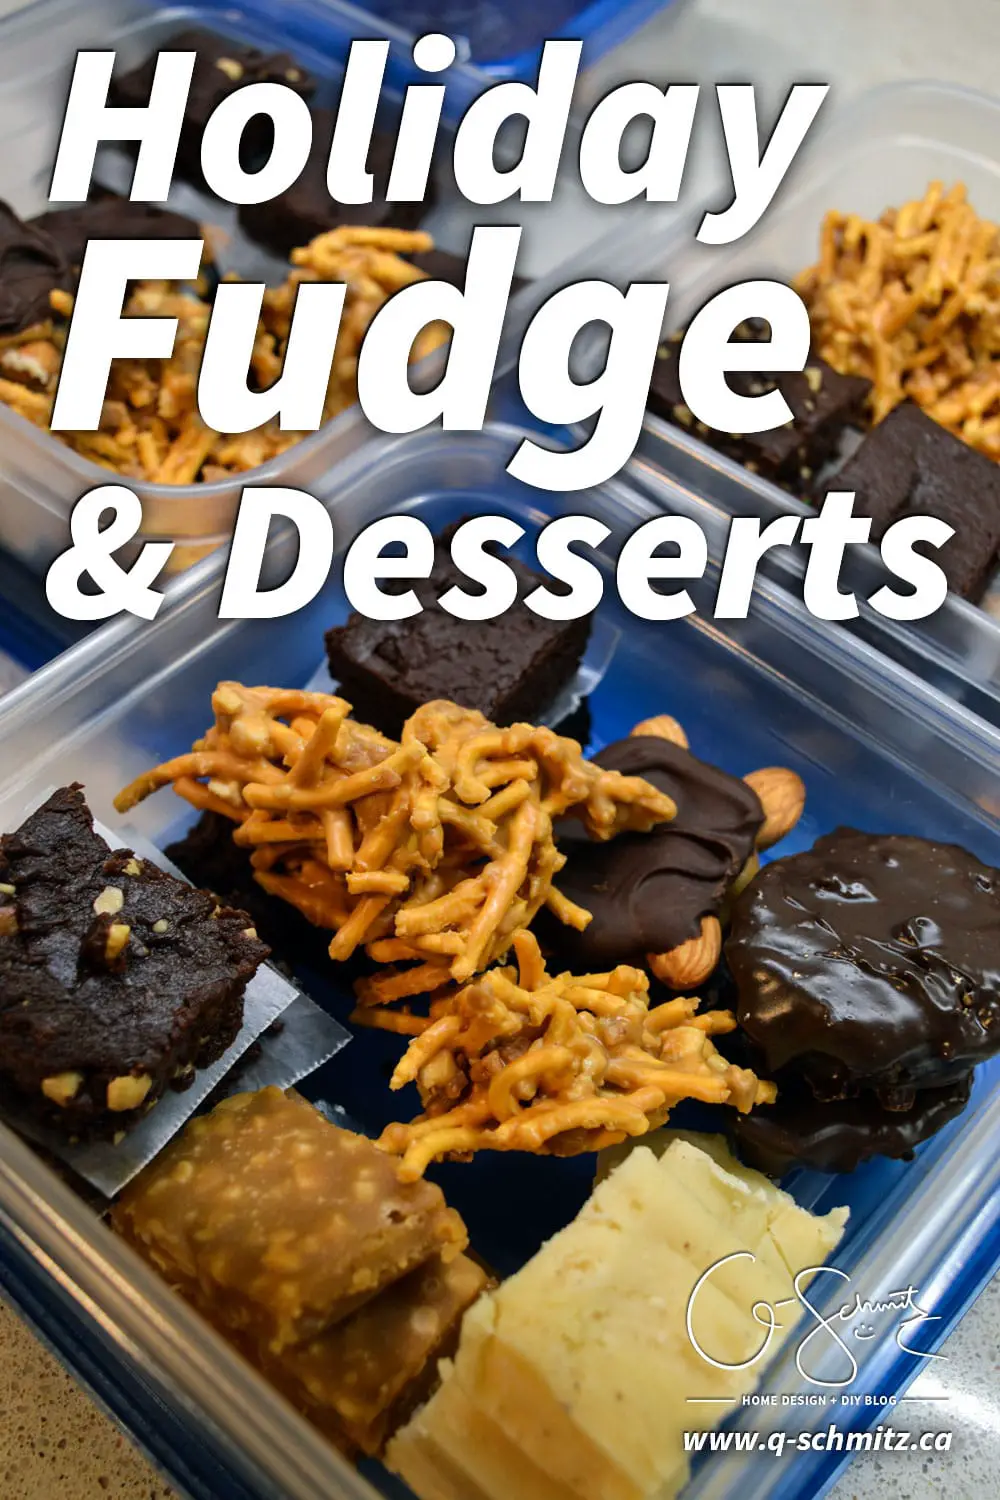 For Christmas this year I decided to gift friends and family with some homemade holiday fudge and desserts - check out the recipes I used!